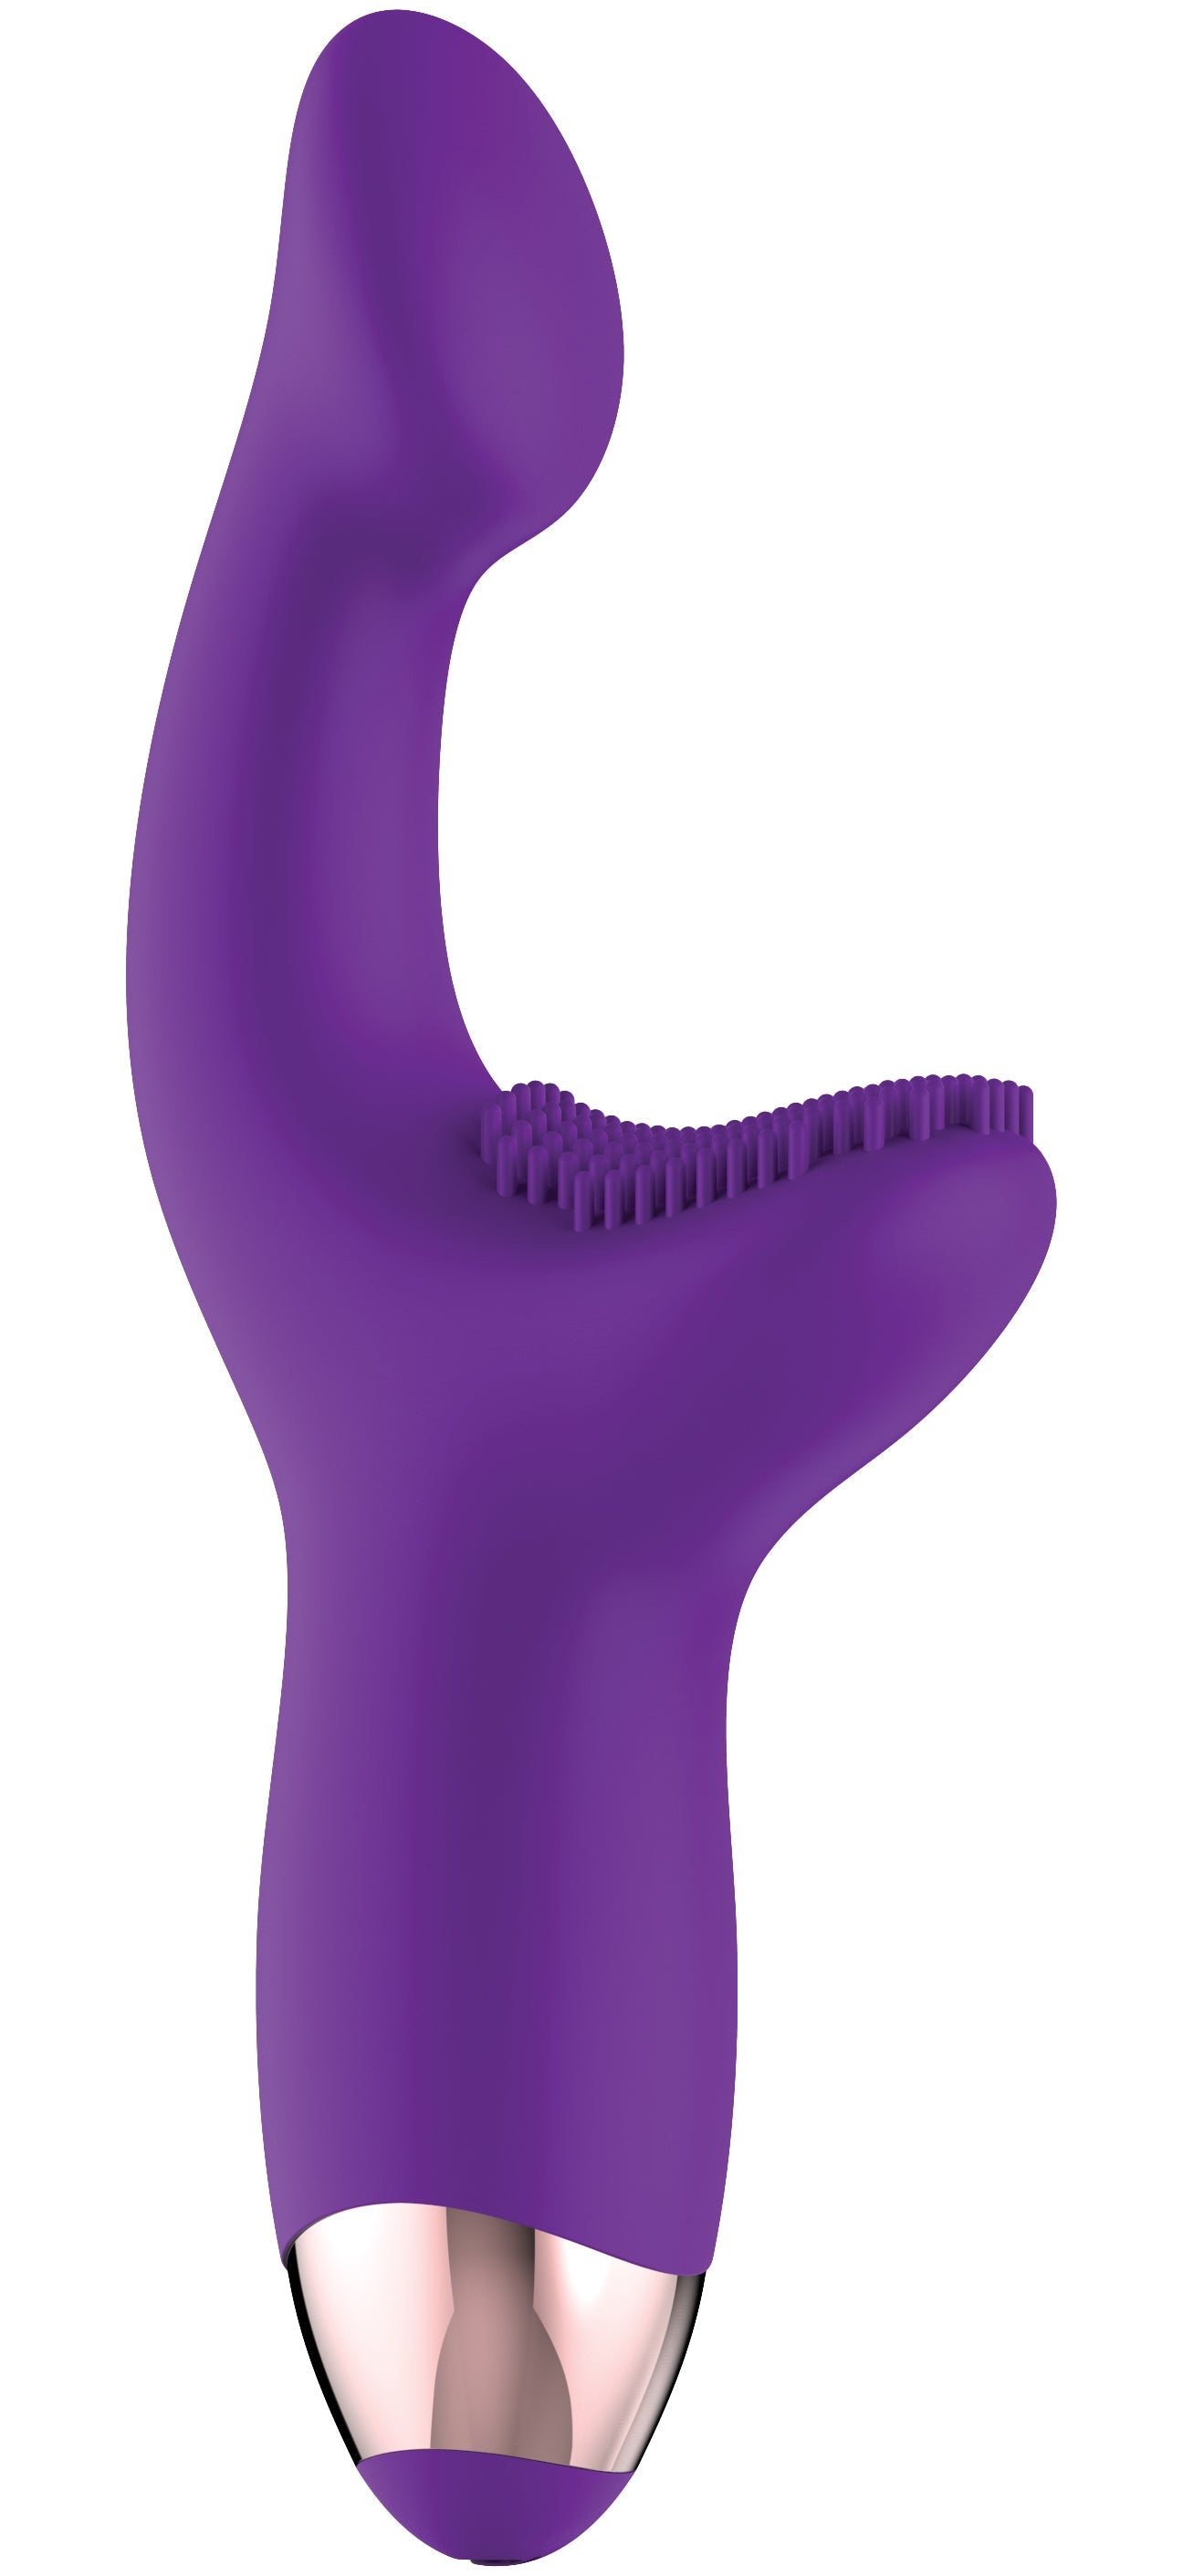 Silicone Rechargeable G-Spot Vibrator Pleaser